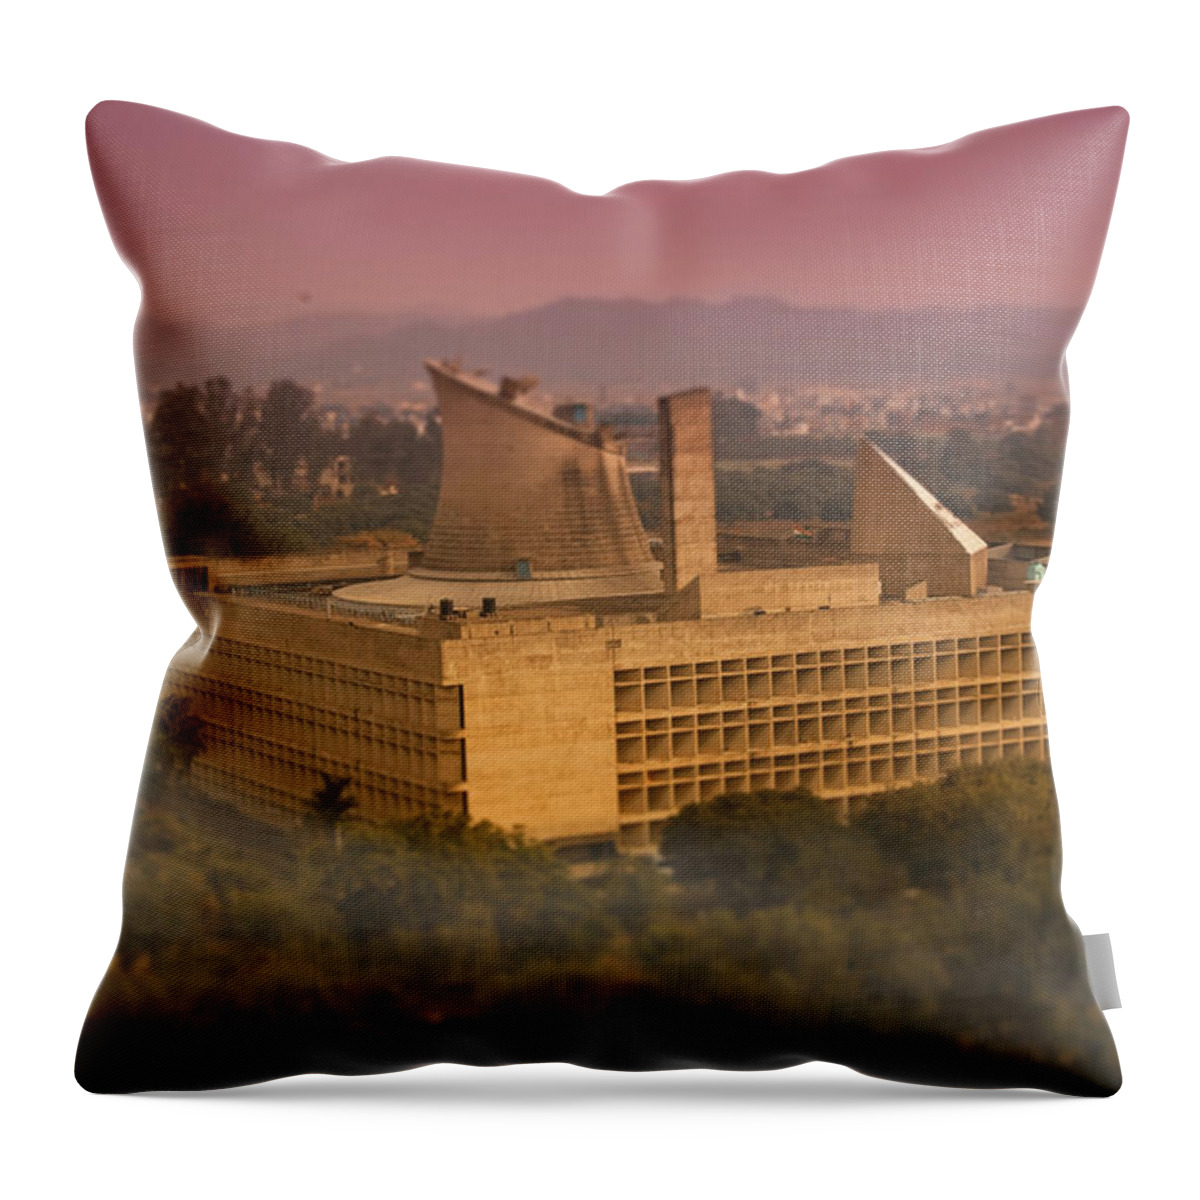 Treetop Throw Pillow featuring the photograph Palace Of Assembly In Chandigarh At by Artur Debat